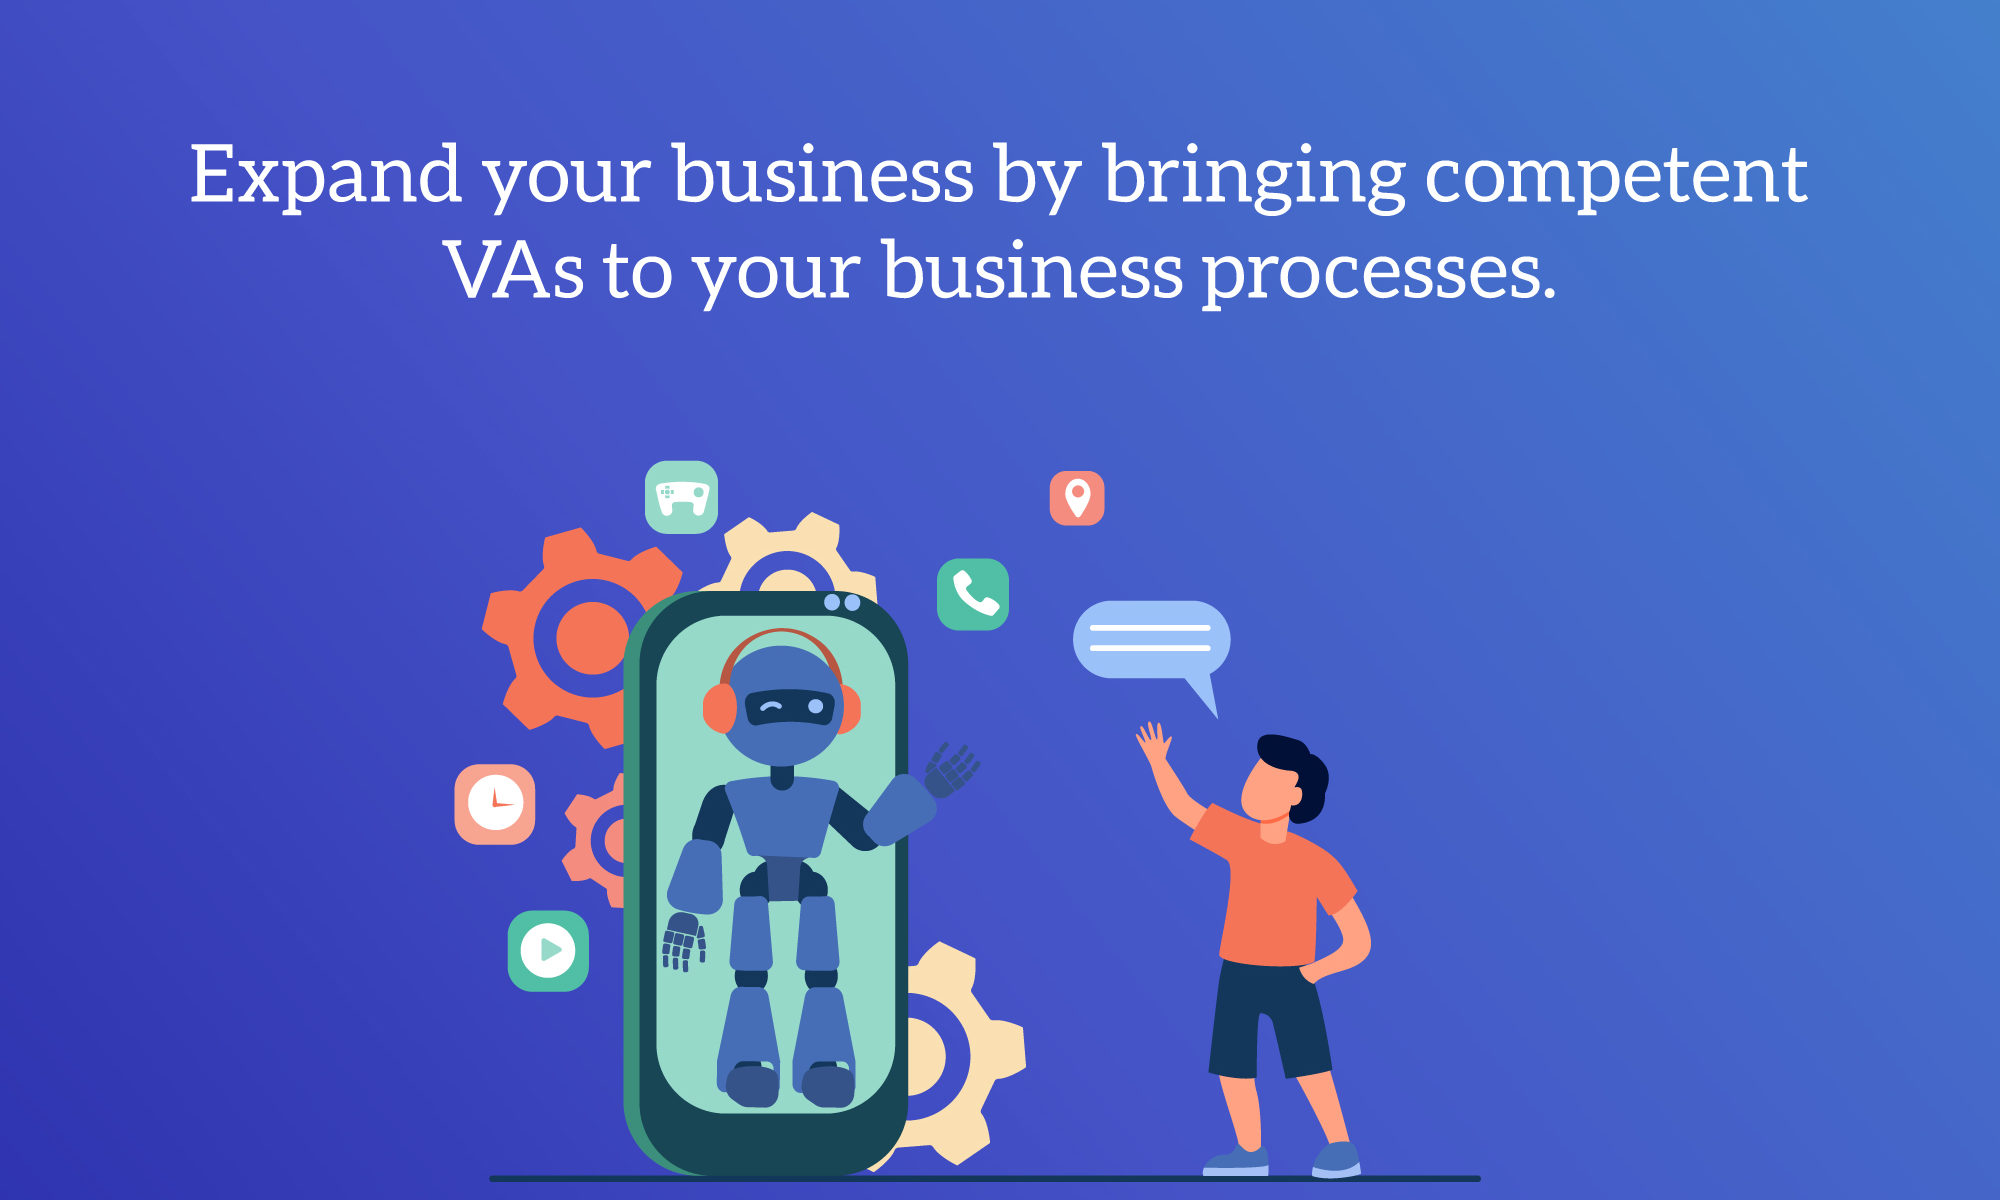 Expand your business by bringing competent VAs to your business processes.